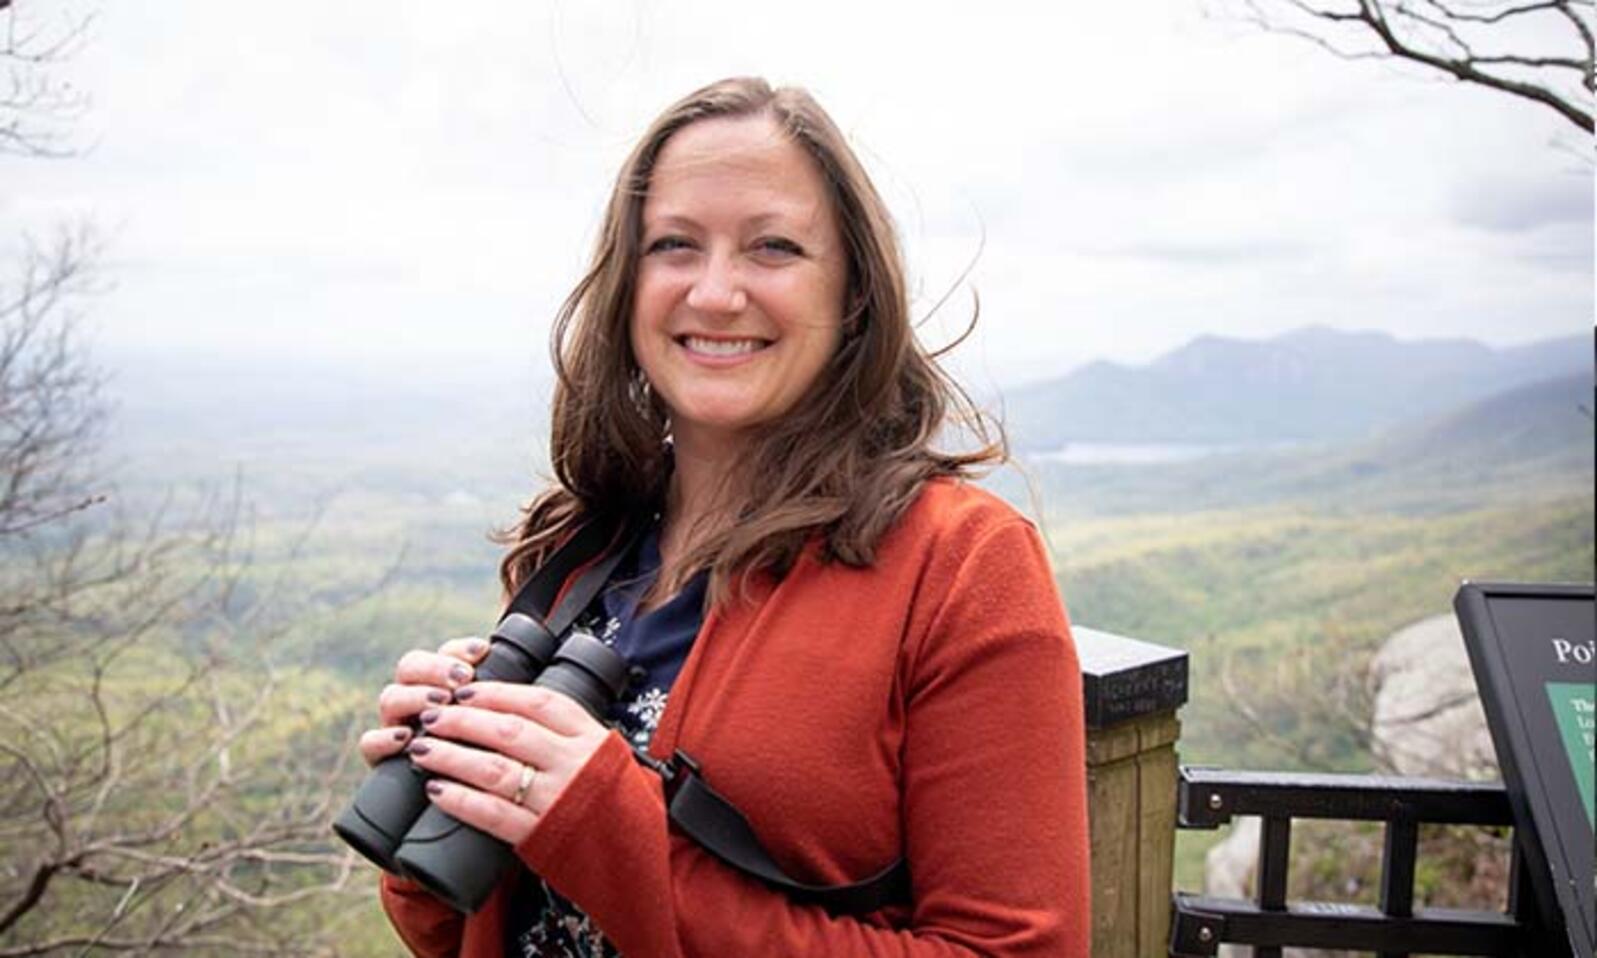 Jen Tyrrel Smiles holding binoculars at the Caesar's Head State Park overlook with a vast landscape view of green mountains and a cloudy sky